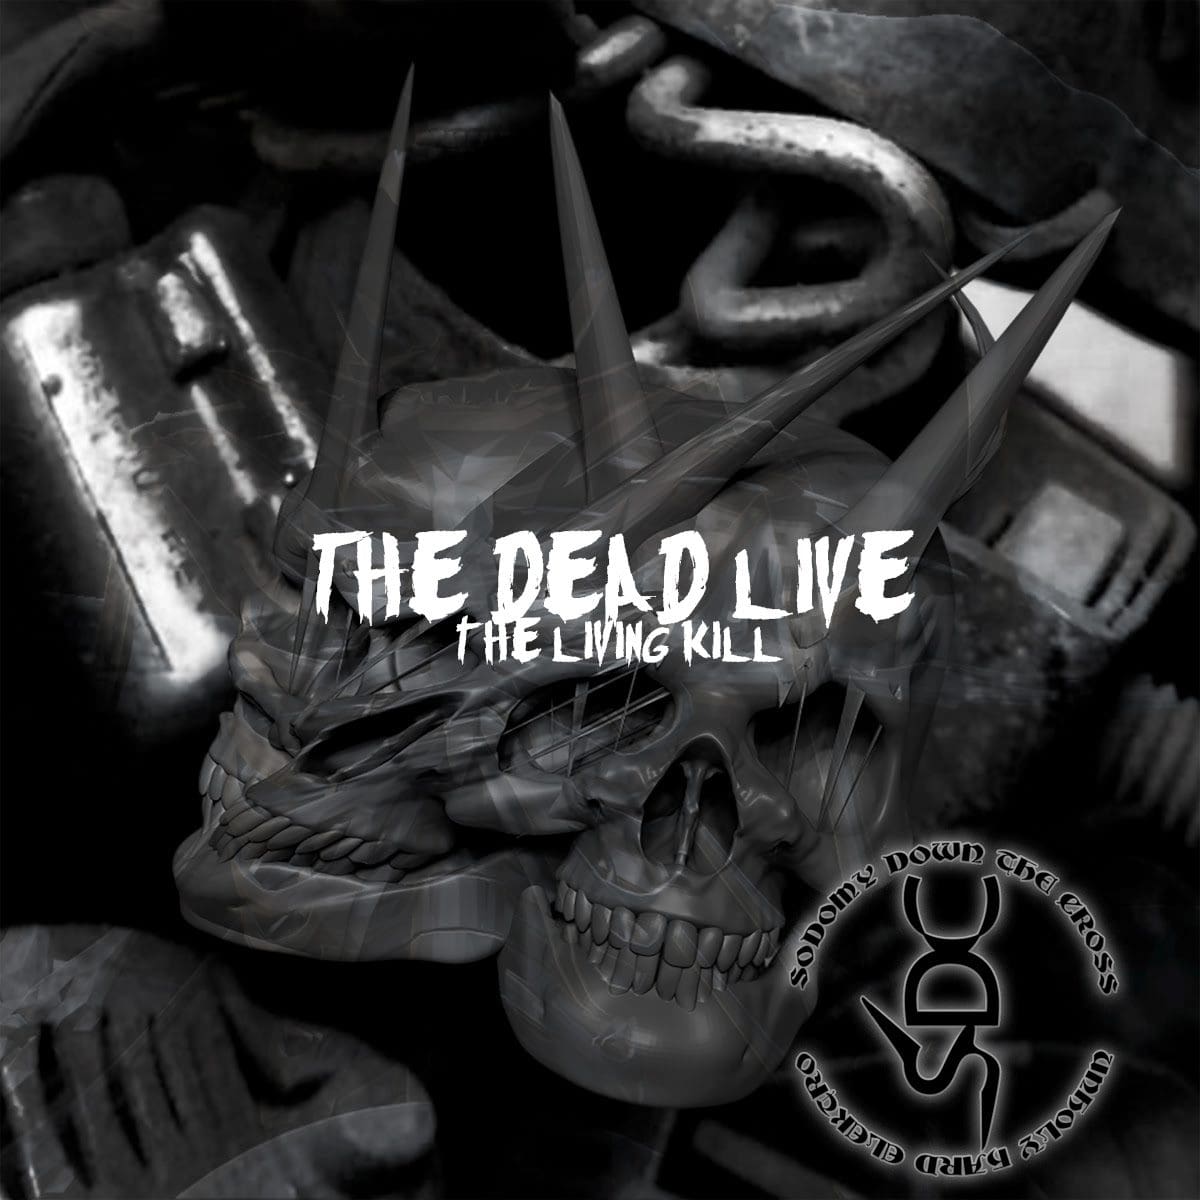 Mexico's Sodomy Down The Cross to release 'The Dead Live The Living Kill' on Insane Records